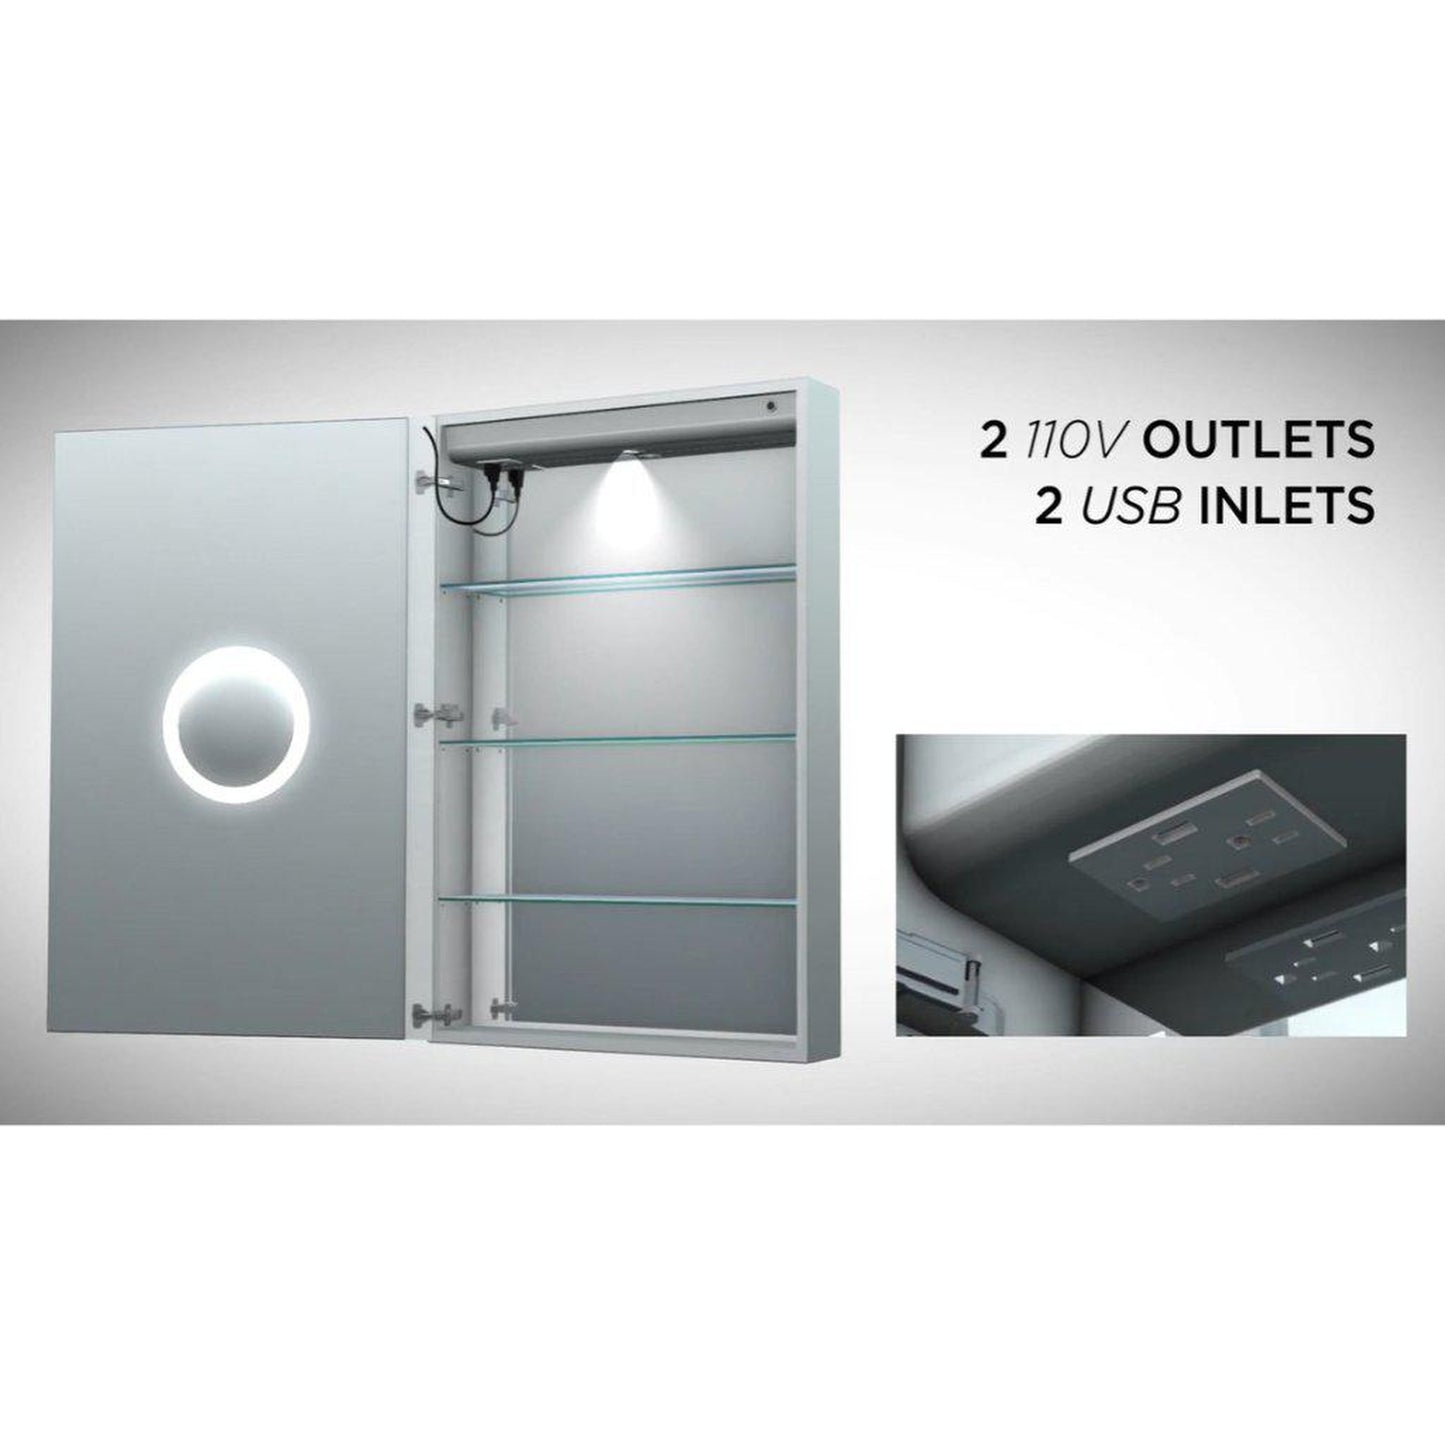 Krugg Reflections Svange 24" x 42" 5000K Single Right Opening Rectangular Recessed/Surface-Mount Illuminated Silver Backed LED Medicine Cabinet Mirror With Built-in Defogger, Dimmer and Electrical Outlet